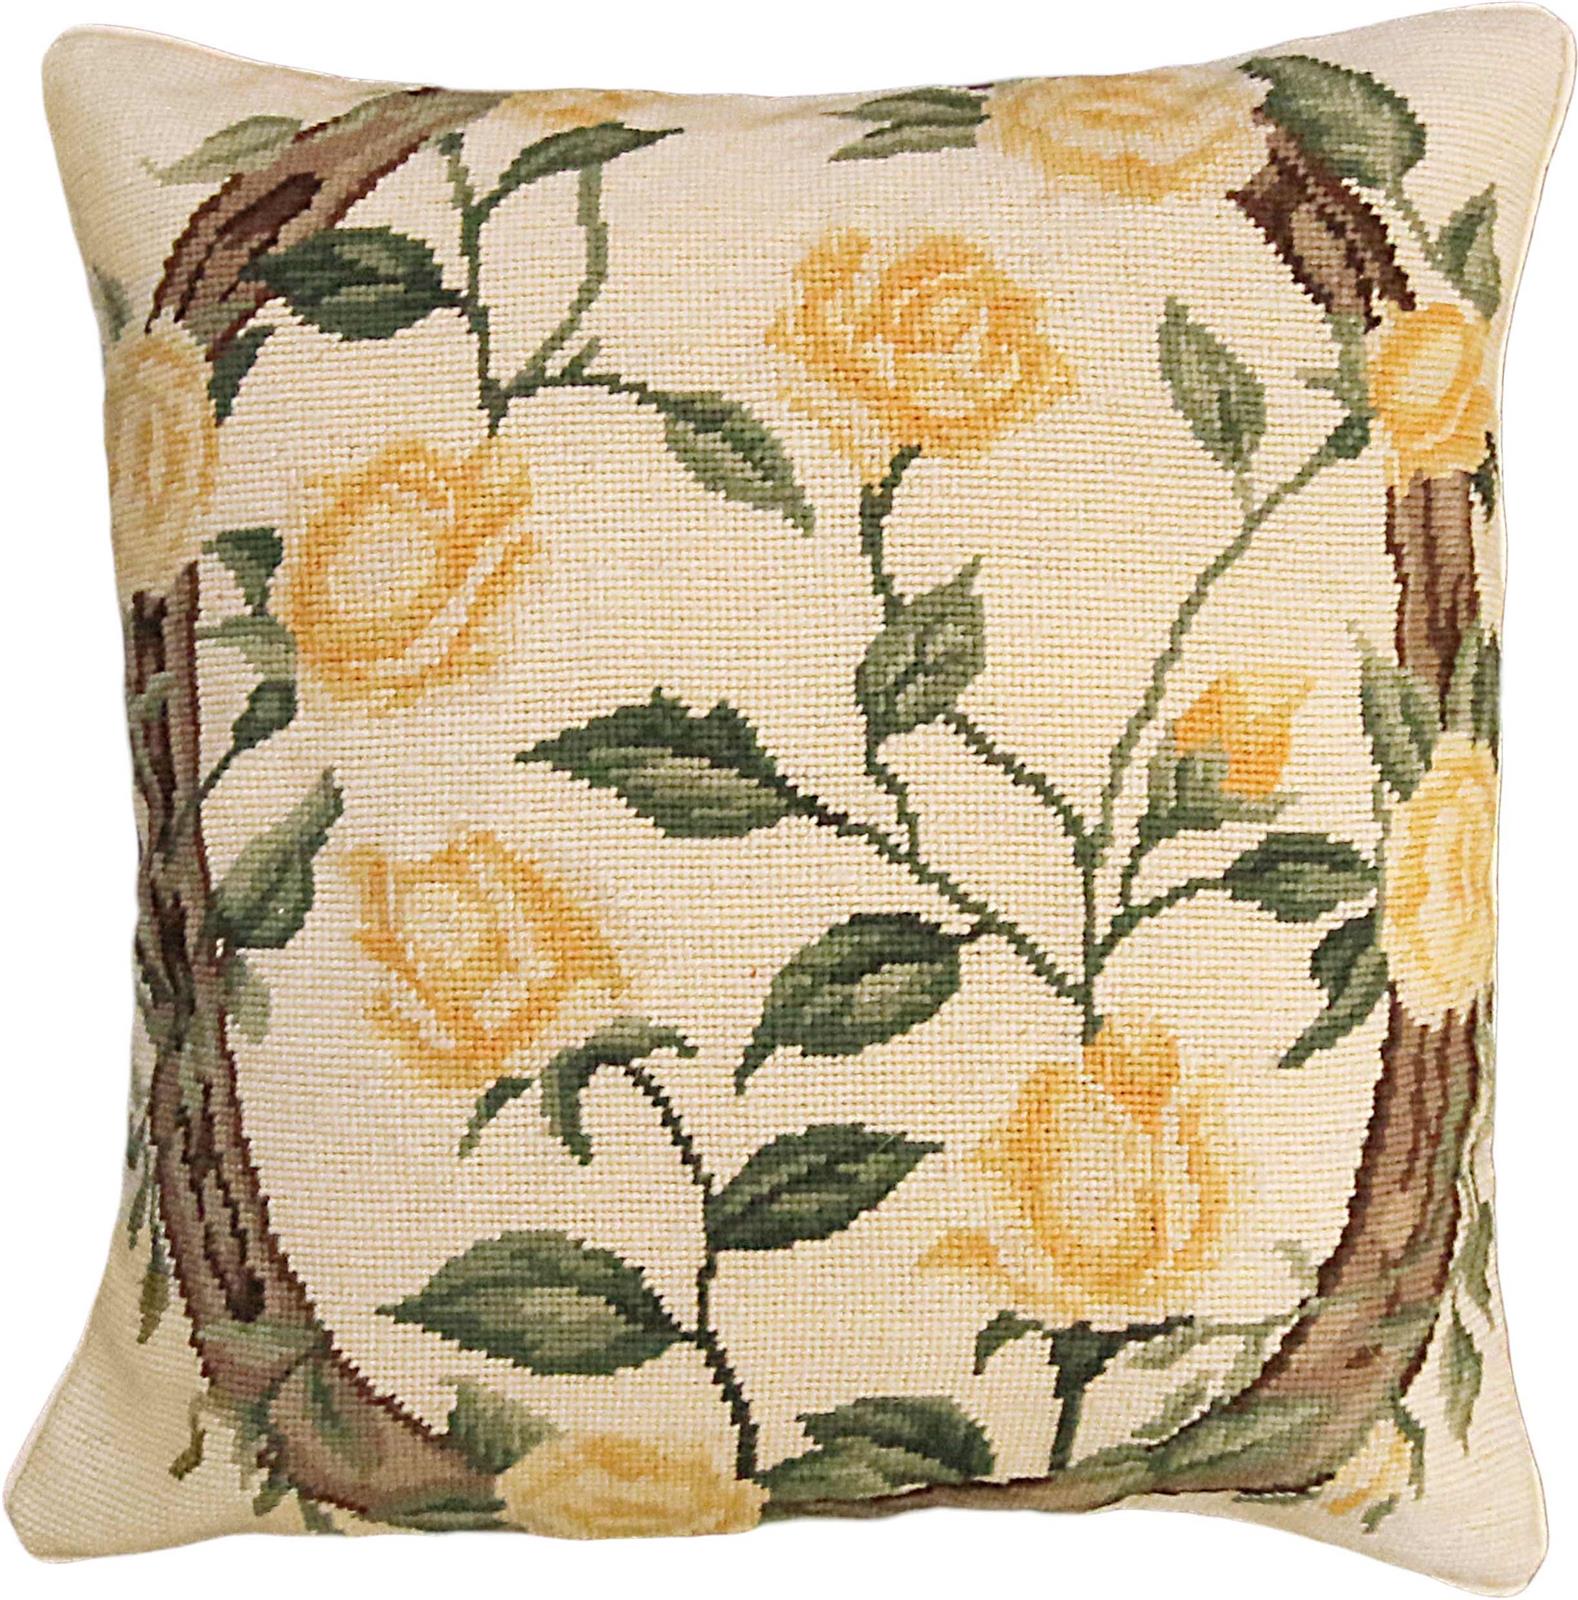 Pillow Throw Needlepoint Rose of Texas 18x18 Beige Back Yellow Wool Cotton-Image 1